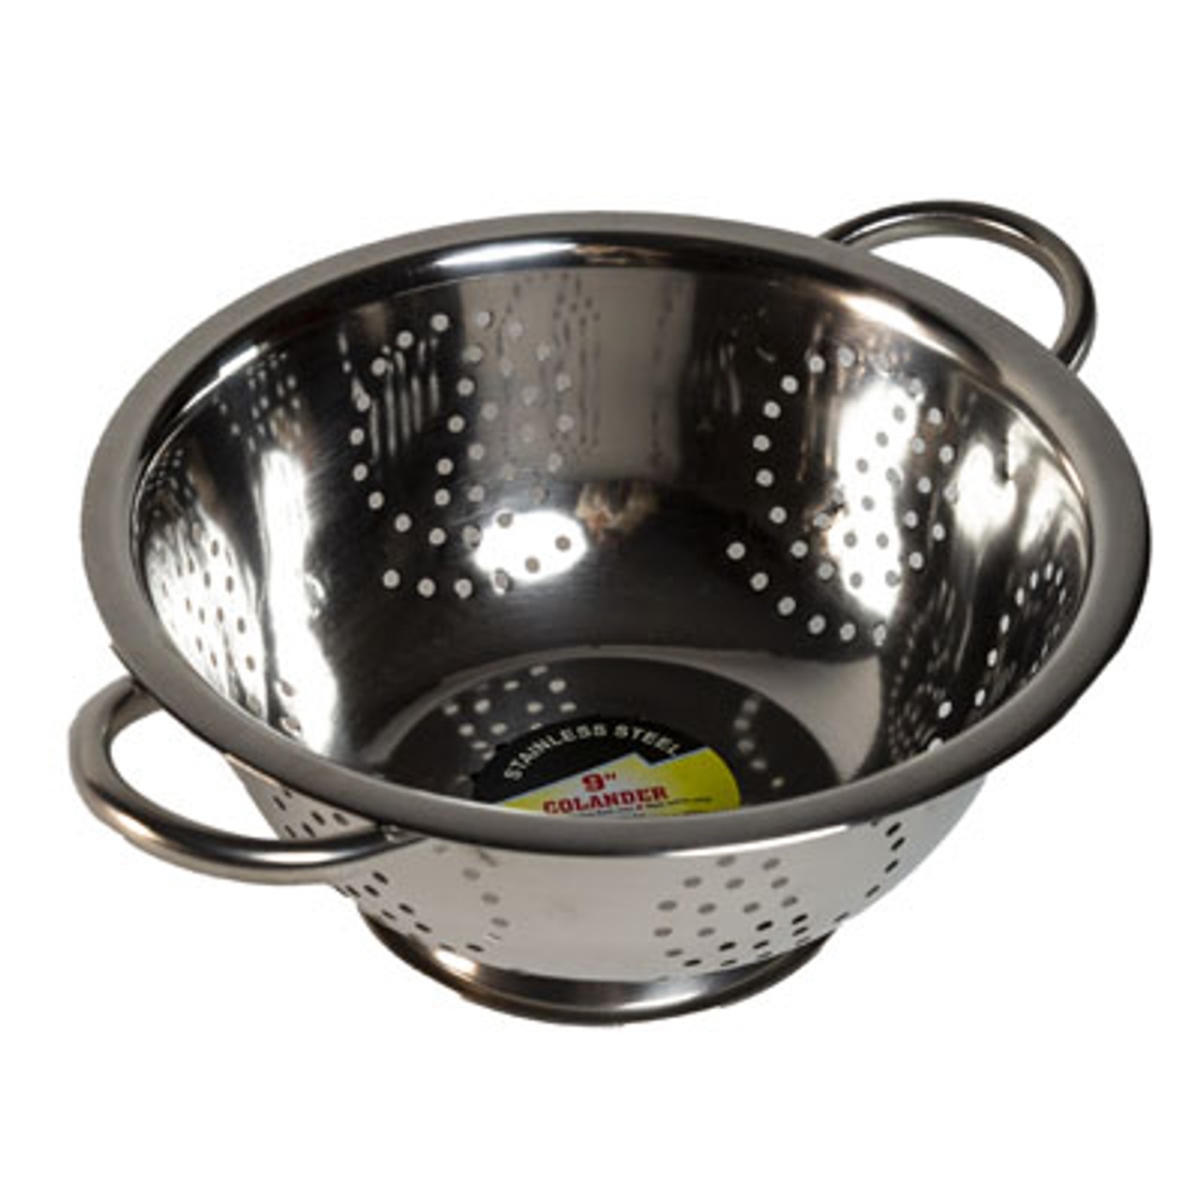 Picture of Regent Products 25513 9.45 in. Dia. x 4.25 in. Stainless Steel Colander with Base